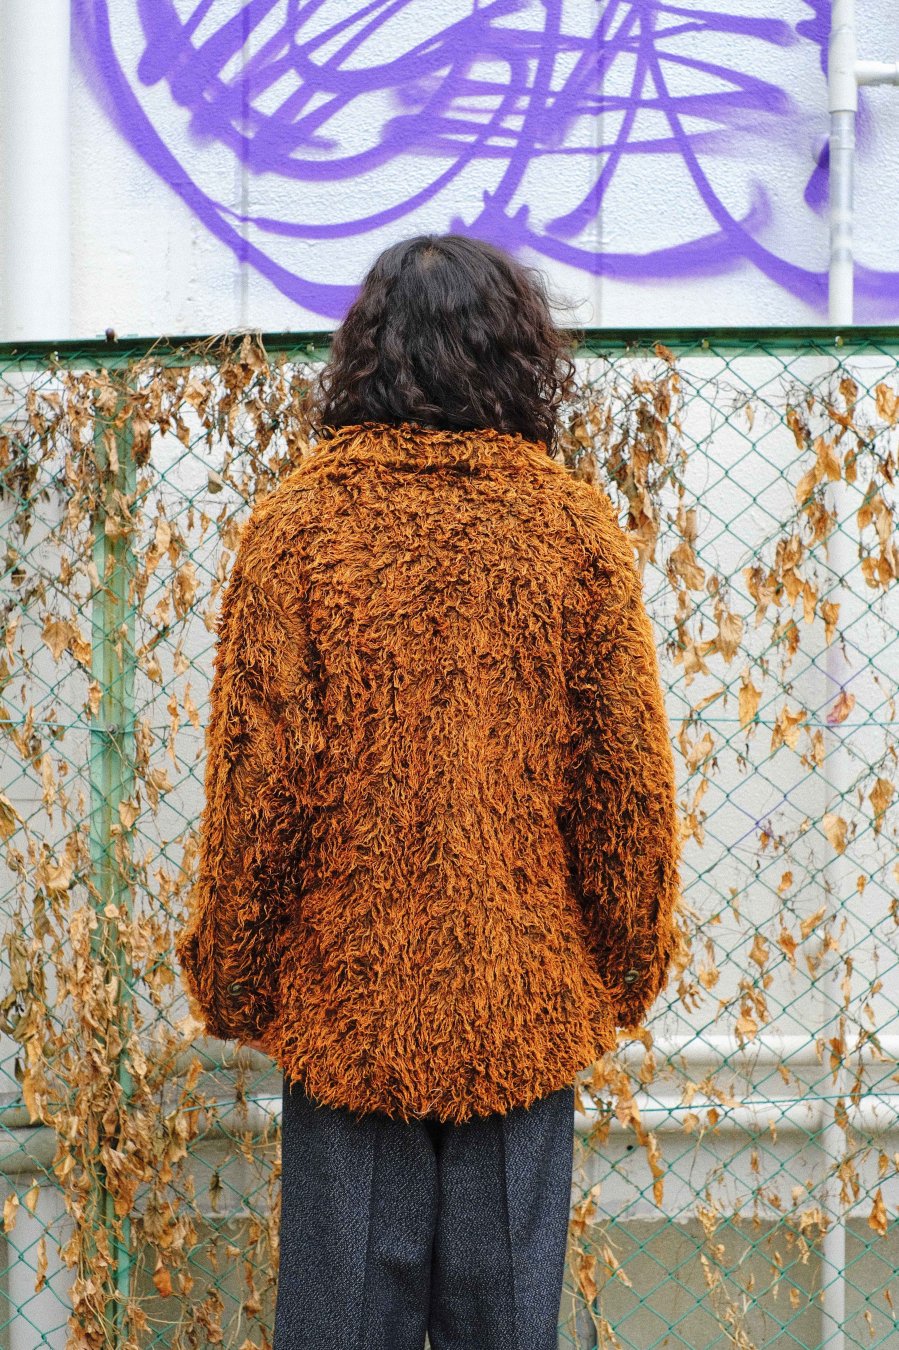 soe(ソーイ)のBear Jacket with Natural Stone-BROWNの通販｜PALETTE